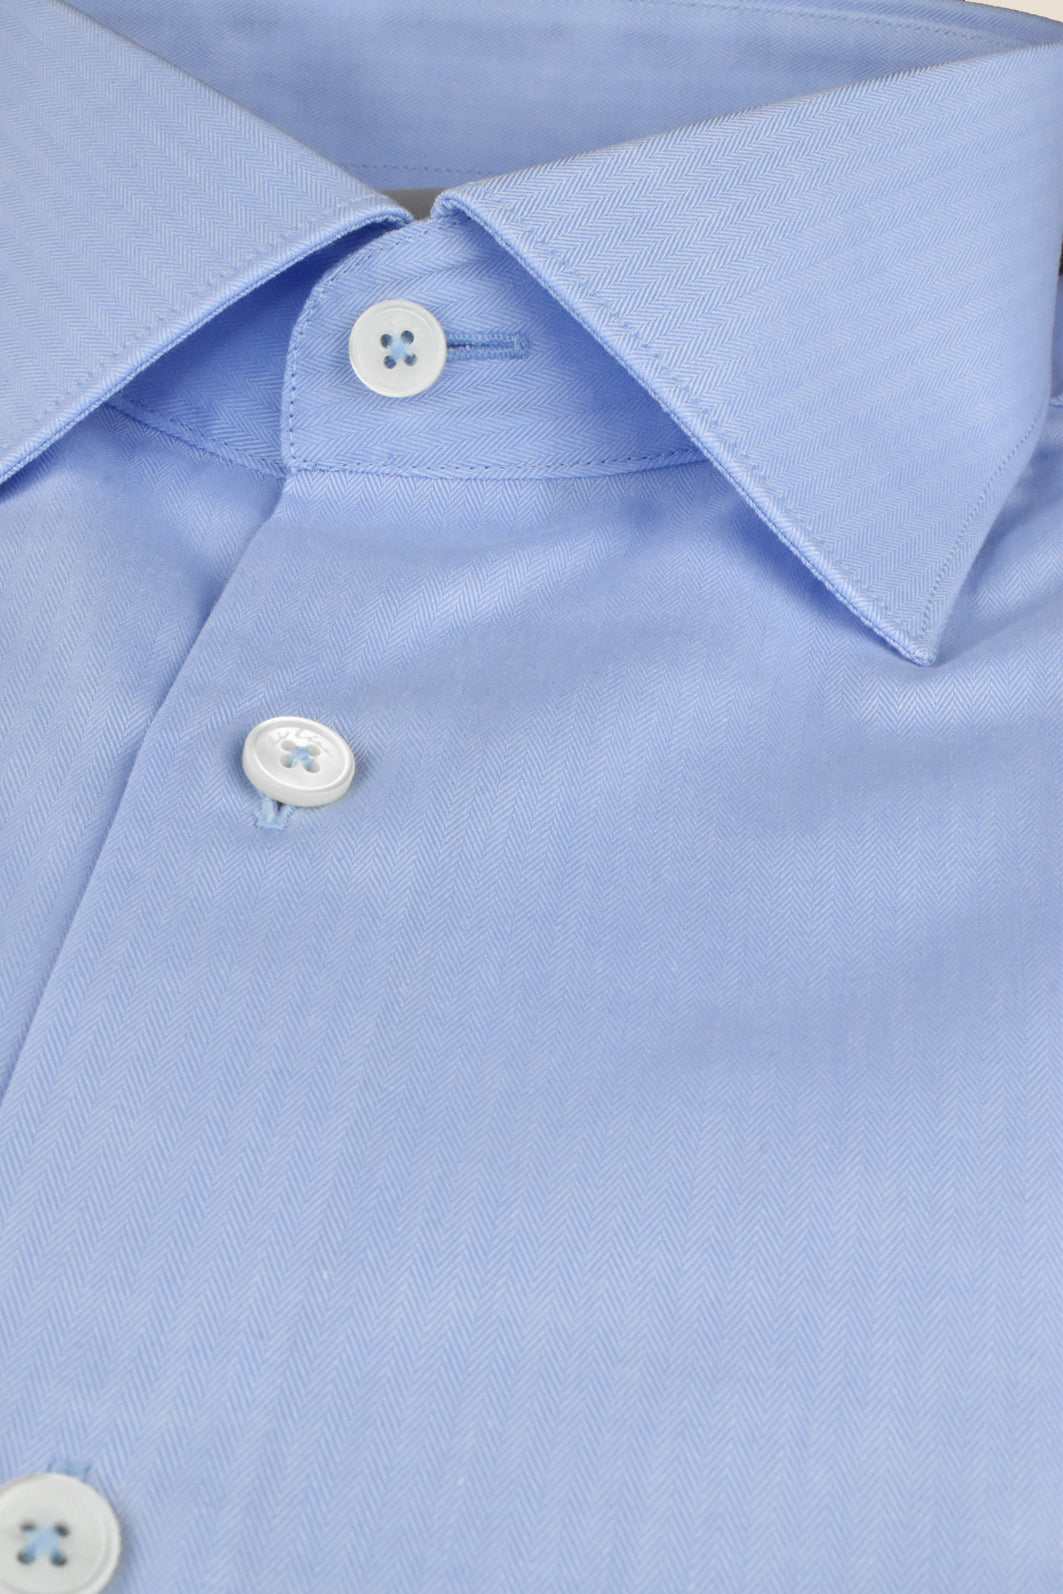 Light blue shirt made of organic cotton with a classic shark collar, light herringbone pattern and casual cut - Made to order